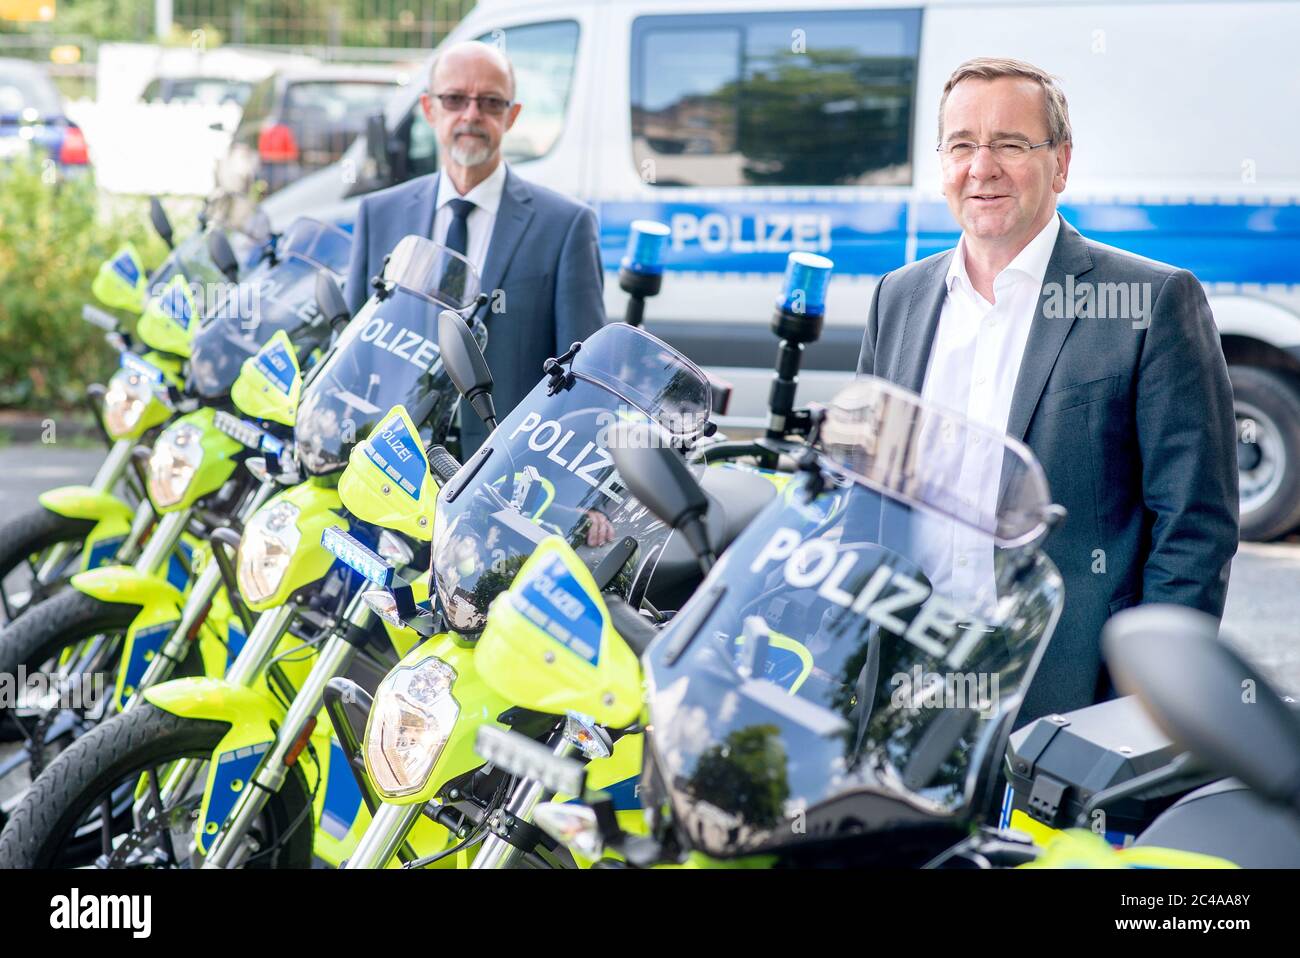 Hanover, Germany. 25th June, 2020. Boris Pistorius (r, SPD), Minister of the Interior in Lower Saxony, and Volker Kluwe, Police Commissioner of the Hanover Police Department, stand between new police motorcycles. The Ministry of the Interior and the Hanover Police Headquarters have presented the results of an optimization analysis for the police's presence and intervention capability. Credit: Hauke-Christian Dittrich/dpa/Alamy Live News Stock Photo